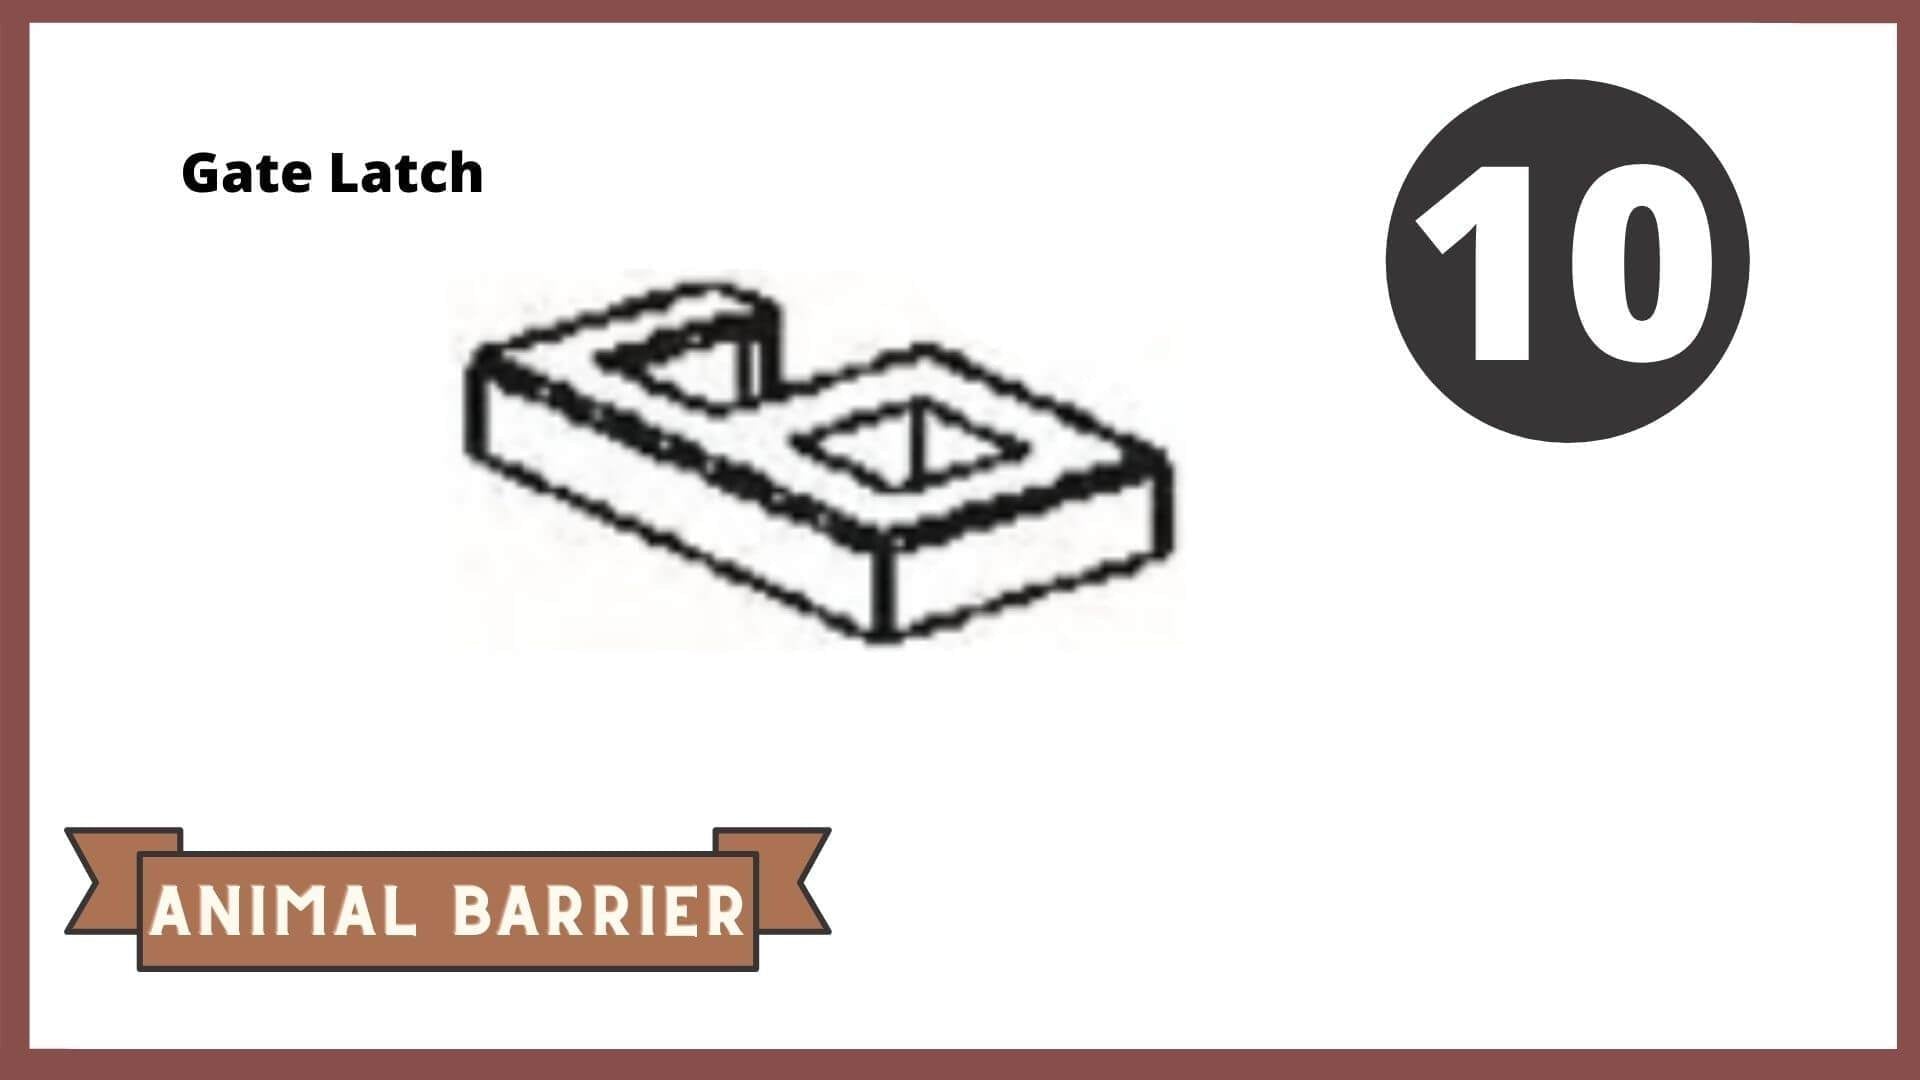 REPLACEMENT PARTS for: Stack & Extend Animal Barrier Kits & Gardens Accessories Frame It All Part #10 - Gate Latch 